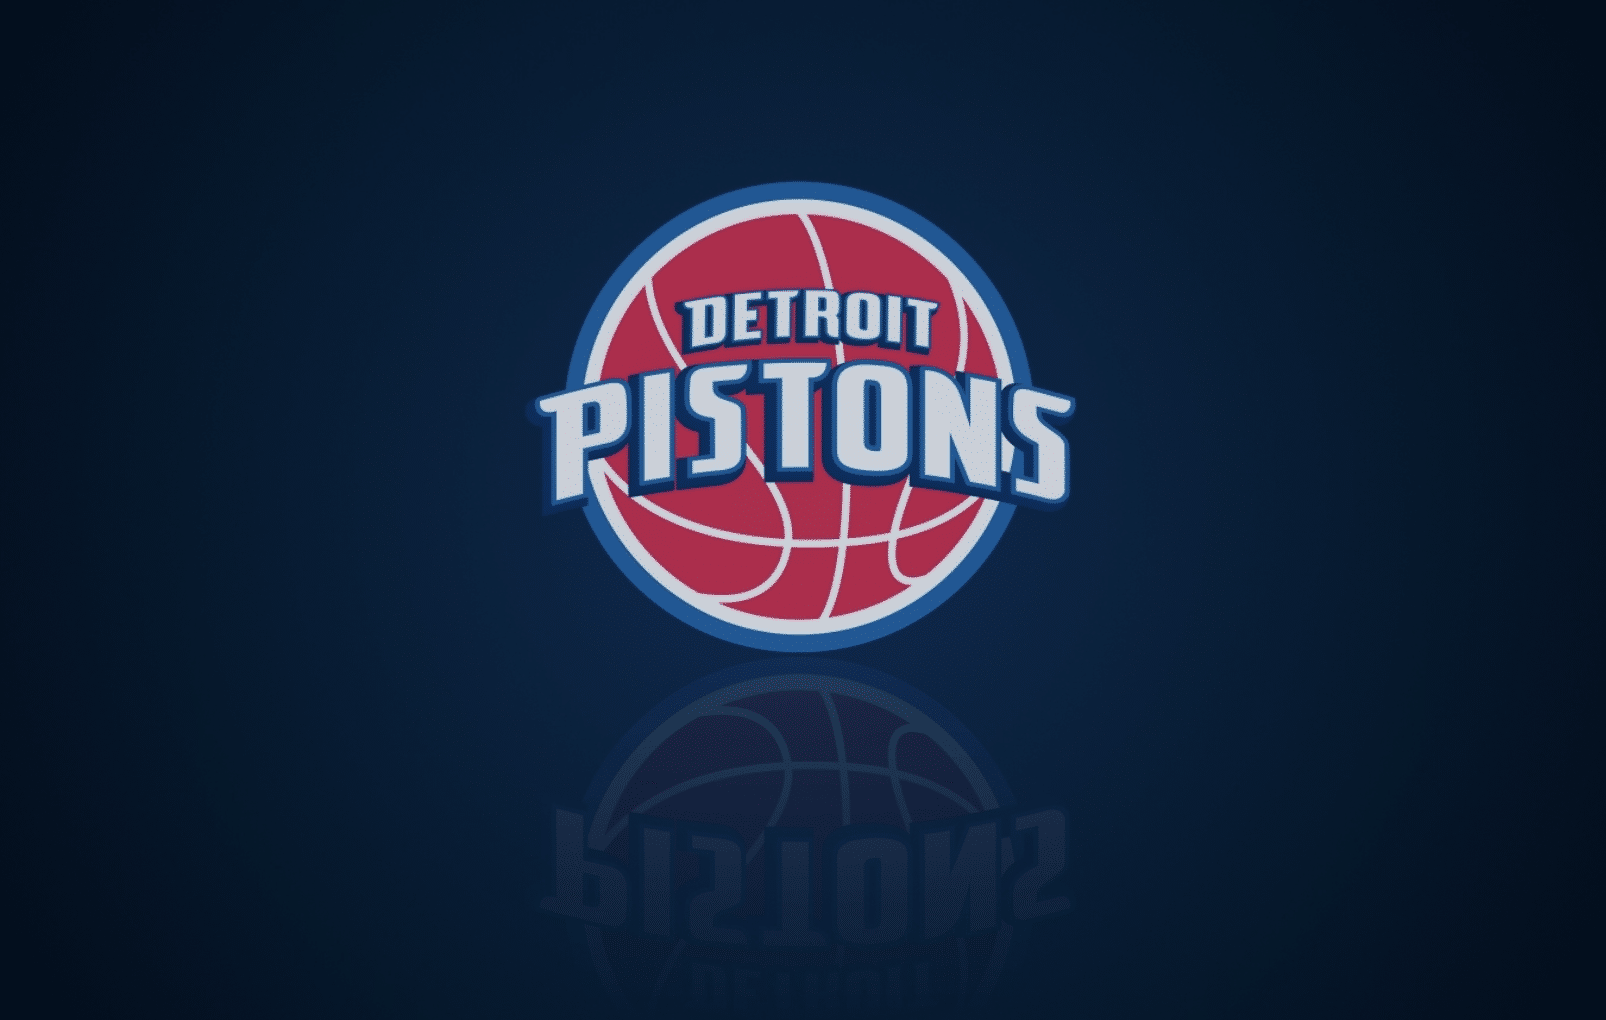 Detroit Pistons face setback Will Bynum Convicted Monty Williams says Detroit Pistons 20th straight loss 'Hurts like you can't believe'